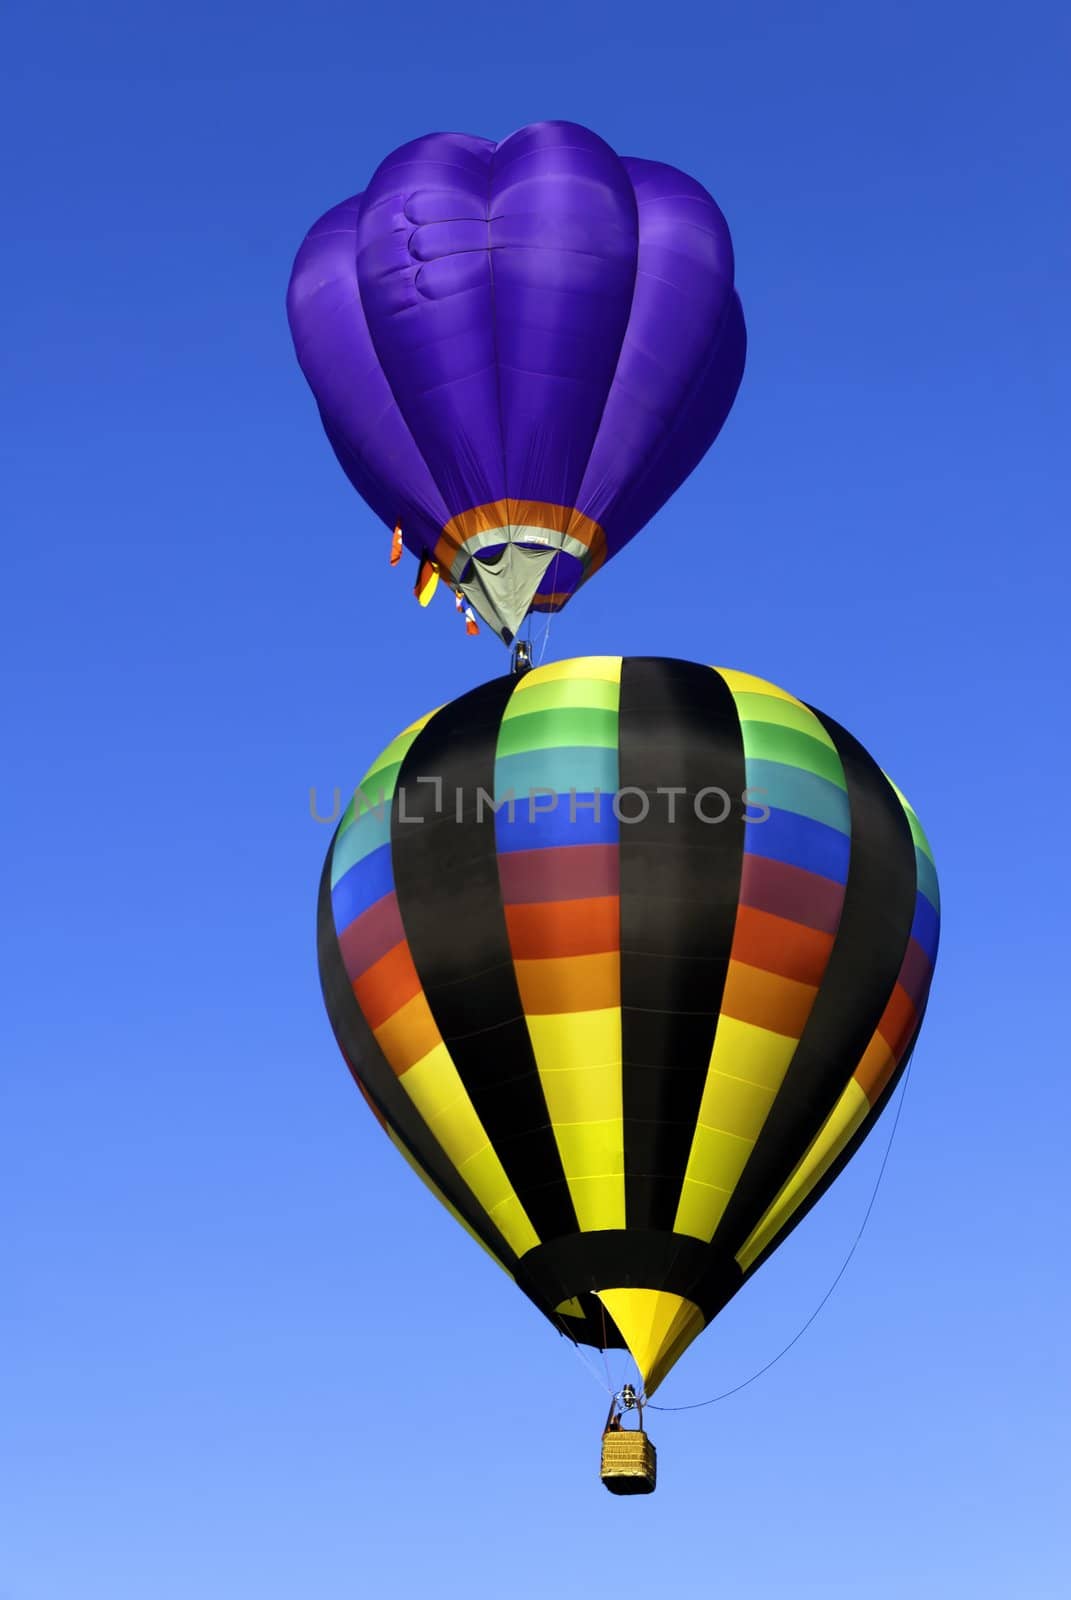 two hot air balloons